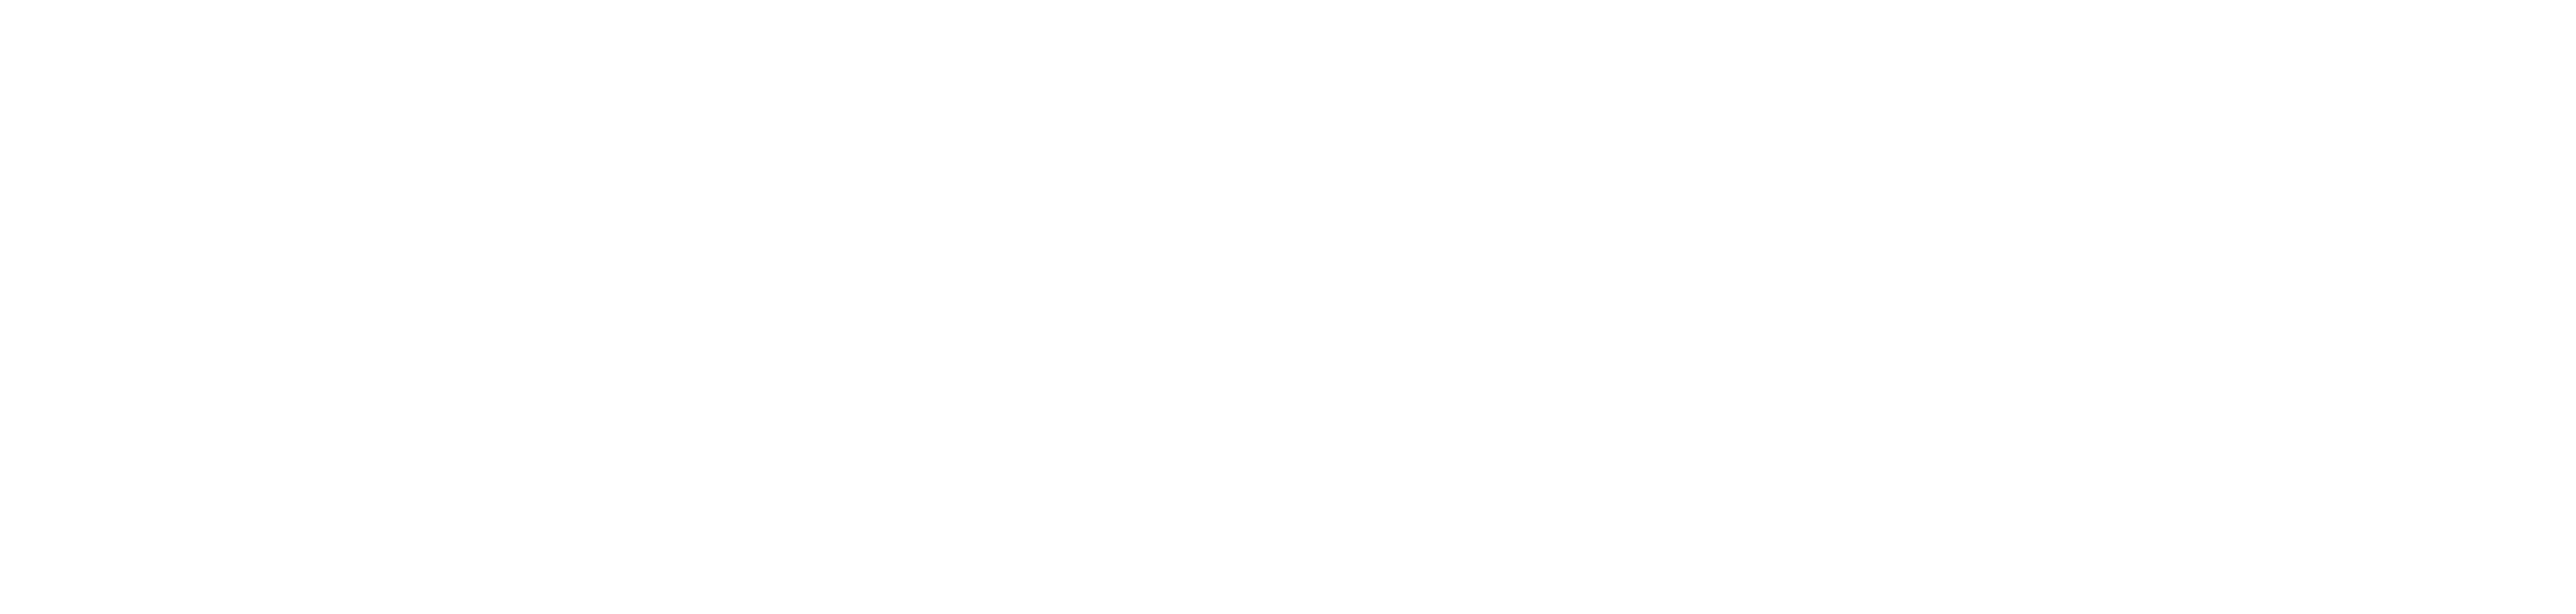 Hypertext: The Second Sight by Suzanne Clores